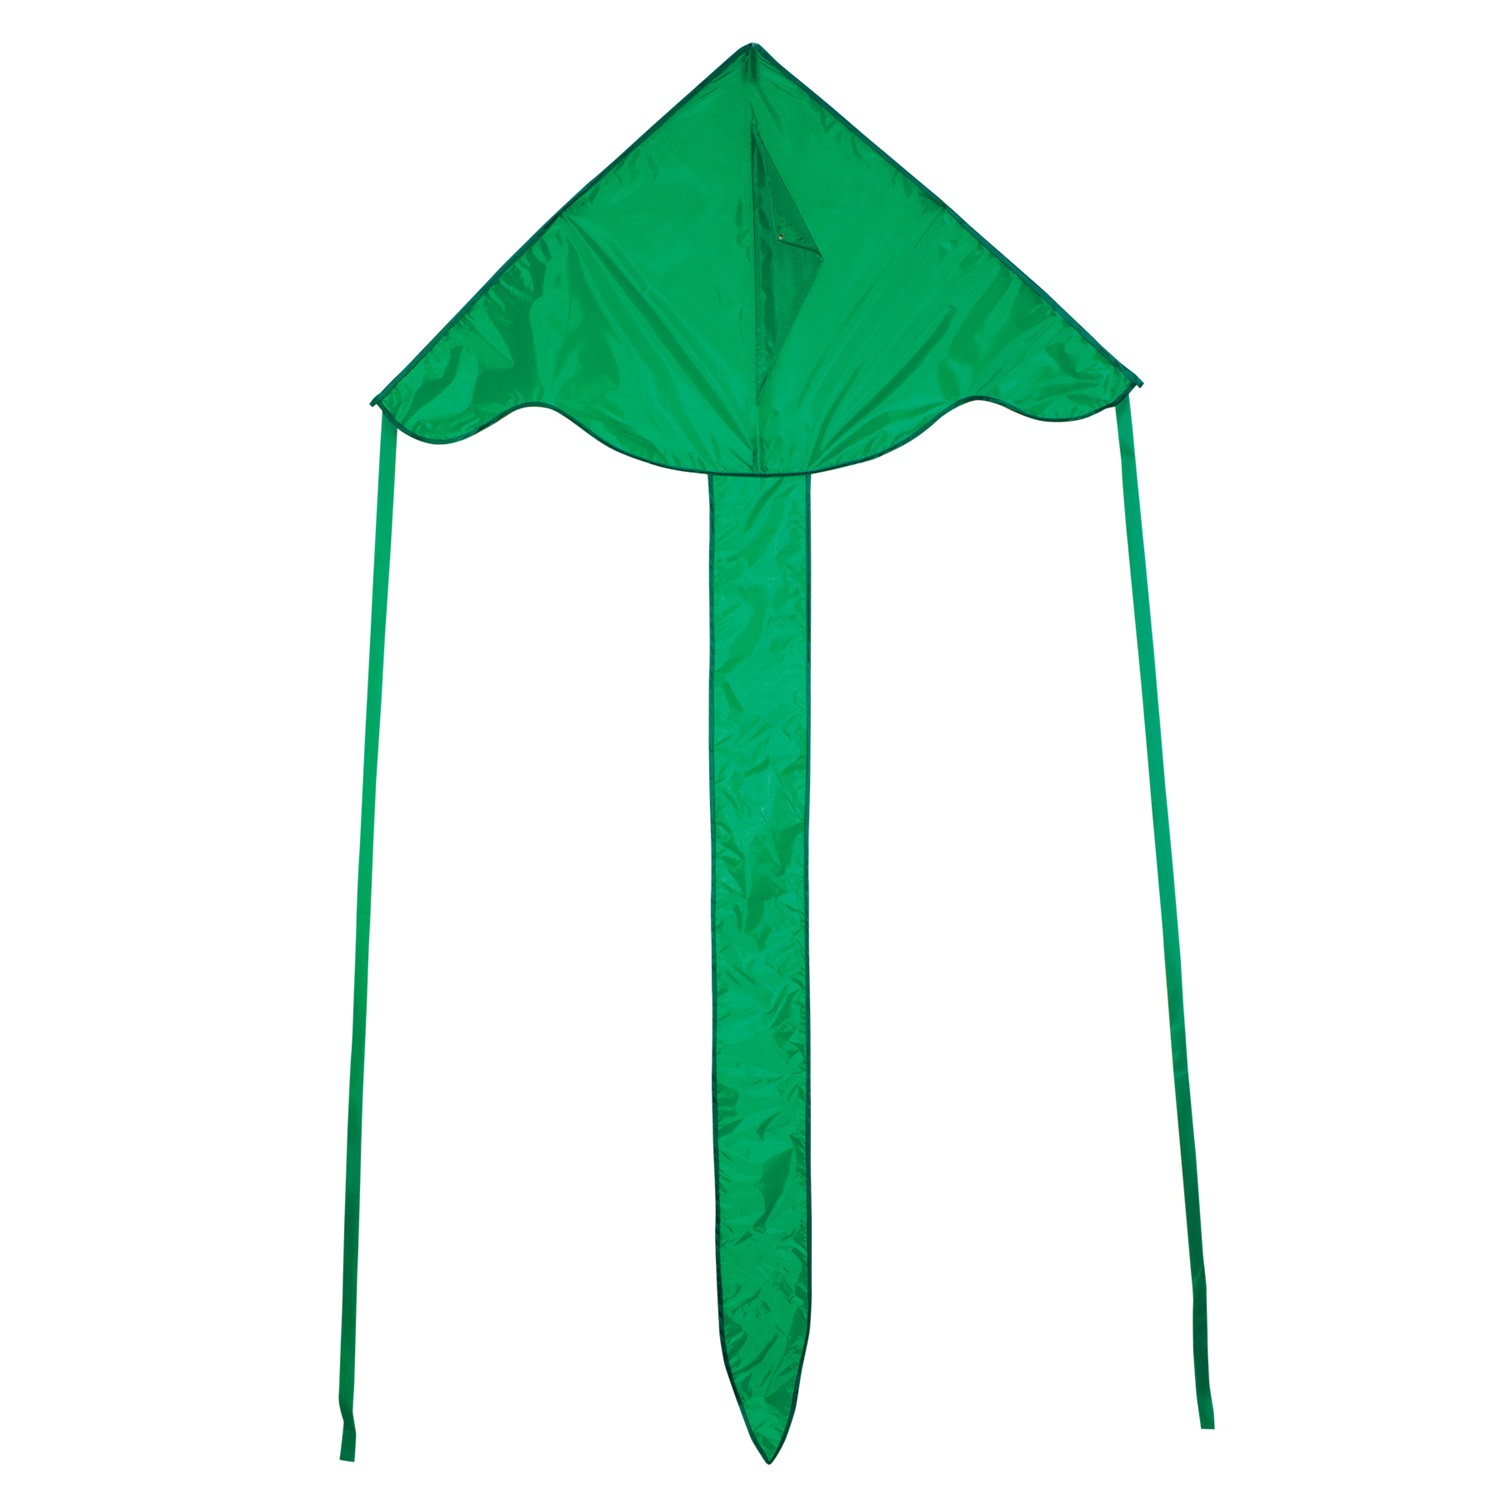 In the Breeze Green Colorfly 43" Fly-Hi Kite 3211